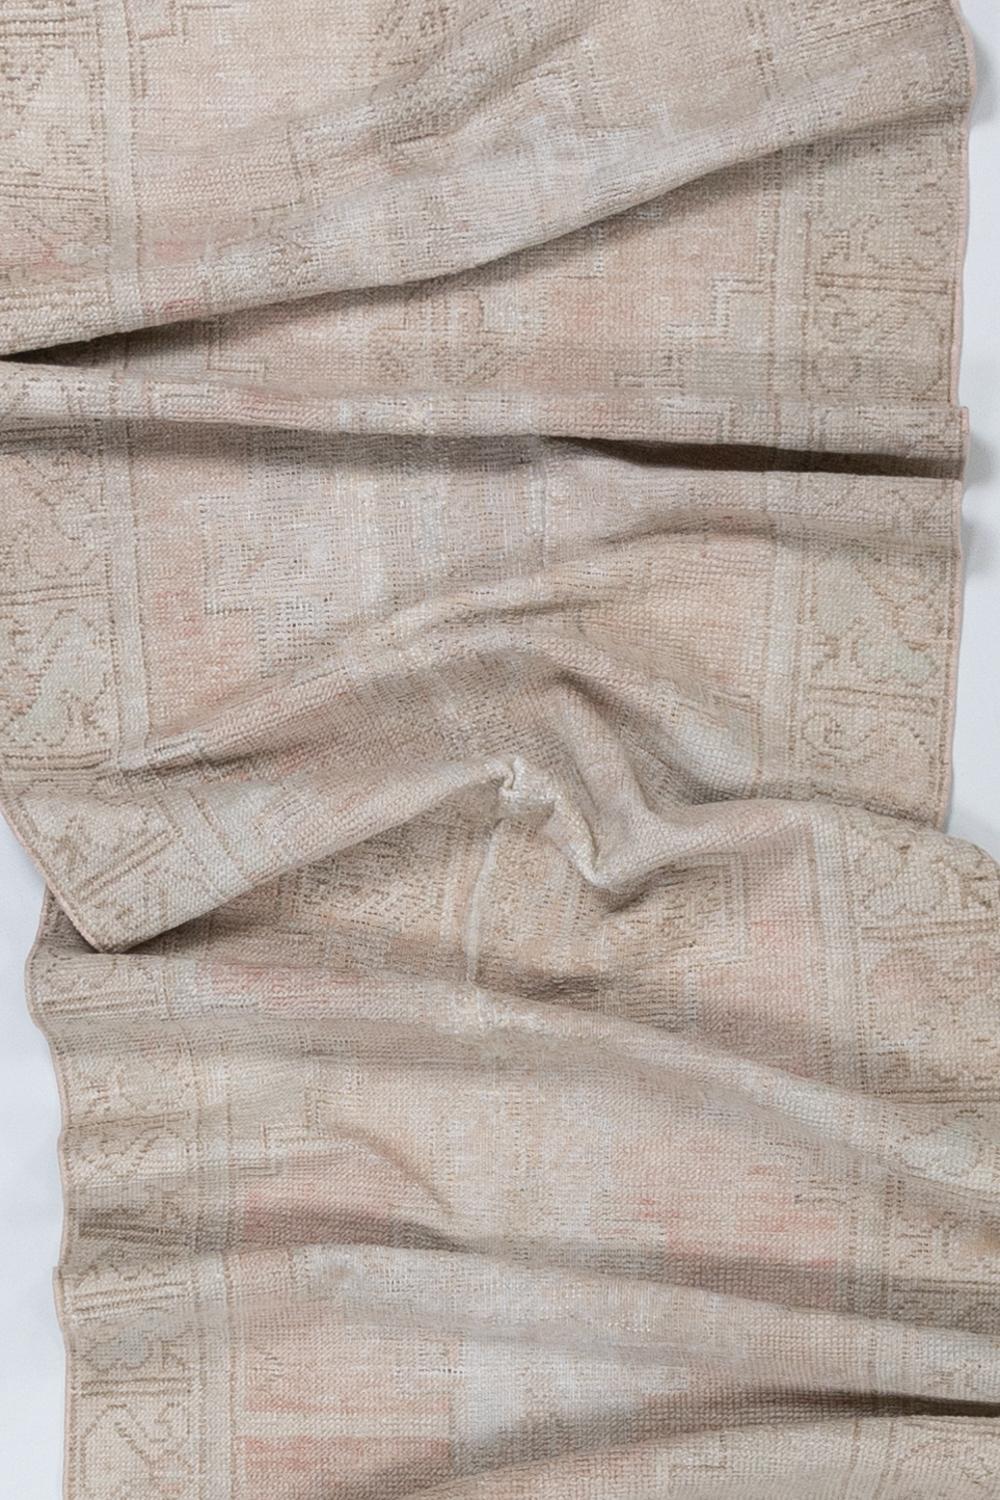 Age: 1930

Colors: soft pale peach, ivory, gray

Pile: low

Wear Notes: 7-8

Material: wool on cotton

Beautiful pale runner with even distressing and a faded colorway.

Vintage and antique rugs are by nature, pre-loved and may show